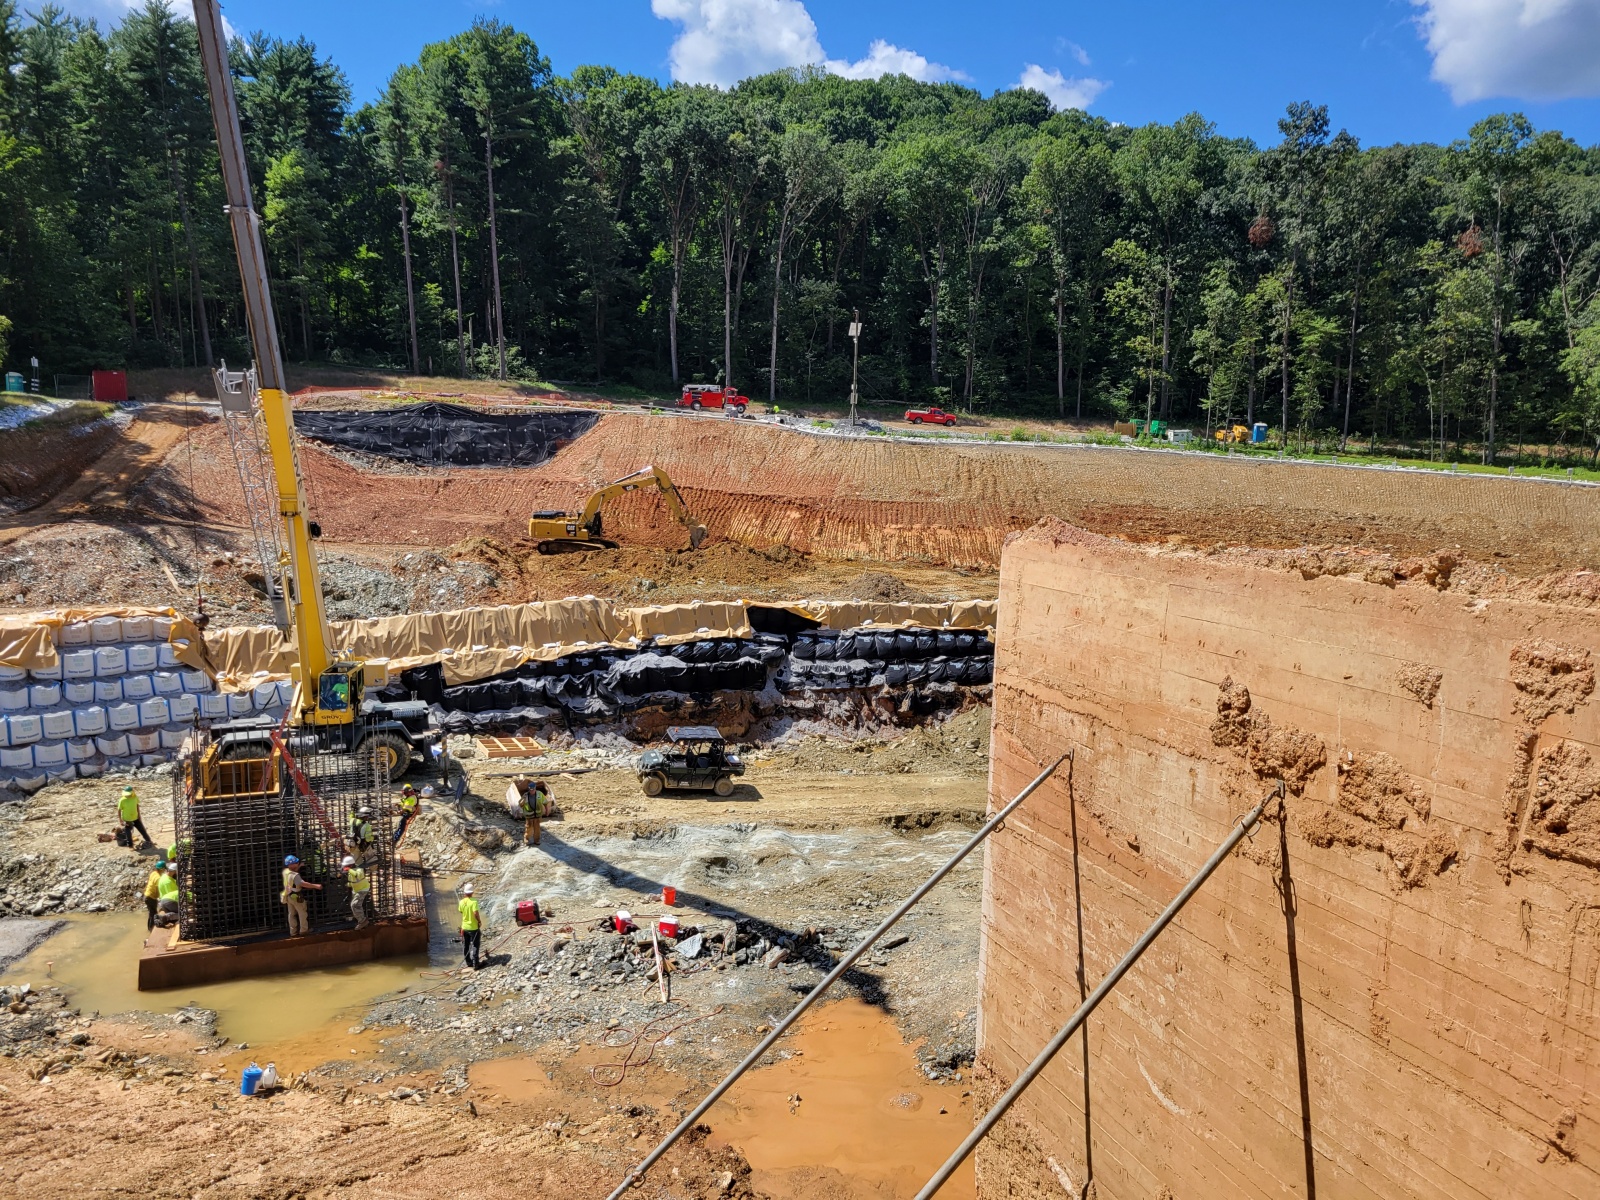 Work continues on the valve tower. The dam’s original 1911 core wall has been exposed for future connection to the new dam structure. Excavation of the left downstream area continues.